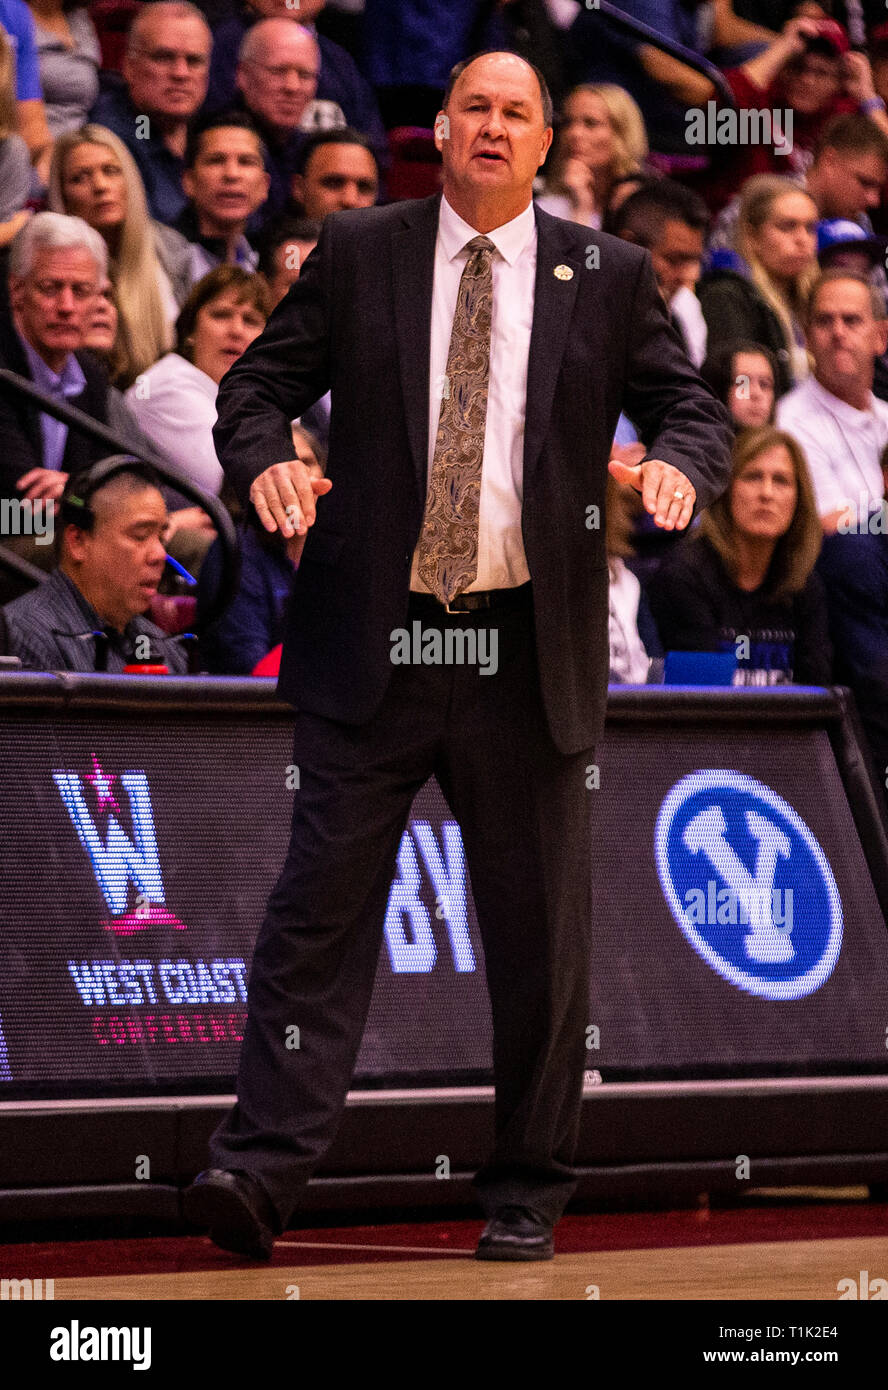 Stanford, CA, USA. 25th Mar, 2019. A. BYU head coach Jeff Judkins during the NCAA Women's Basketball Championship Second Round between the BYU Cougars and the Stanford Cardinal 63-72 lost at Maples Pavilion Stanford, CA. Thurman James /CSM/Alamy Live News Stock Photo